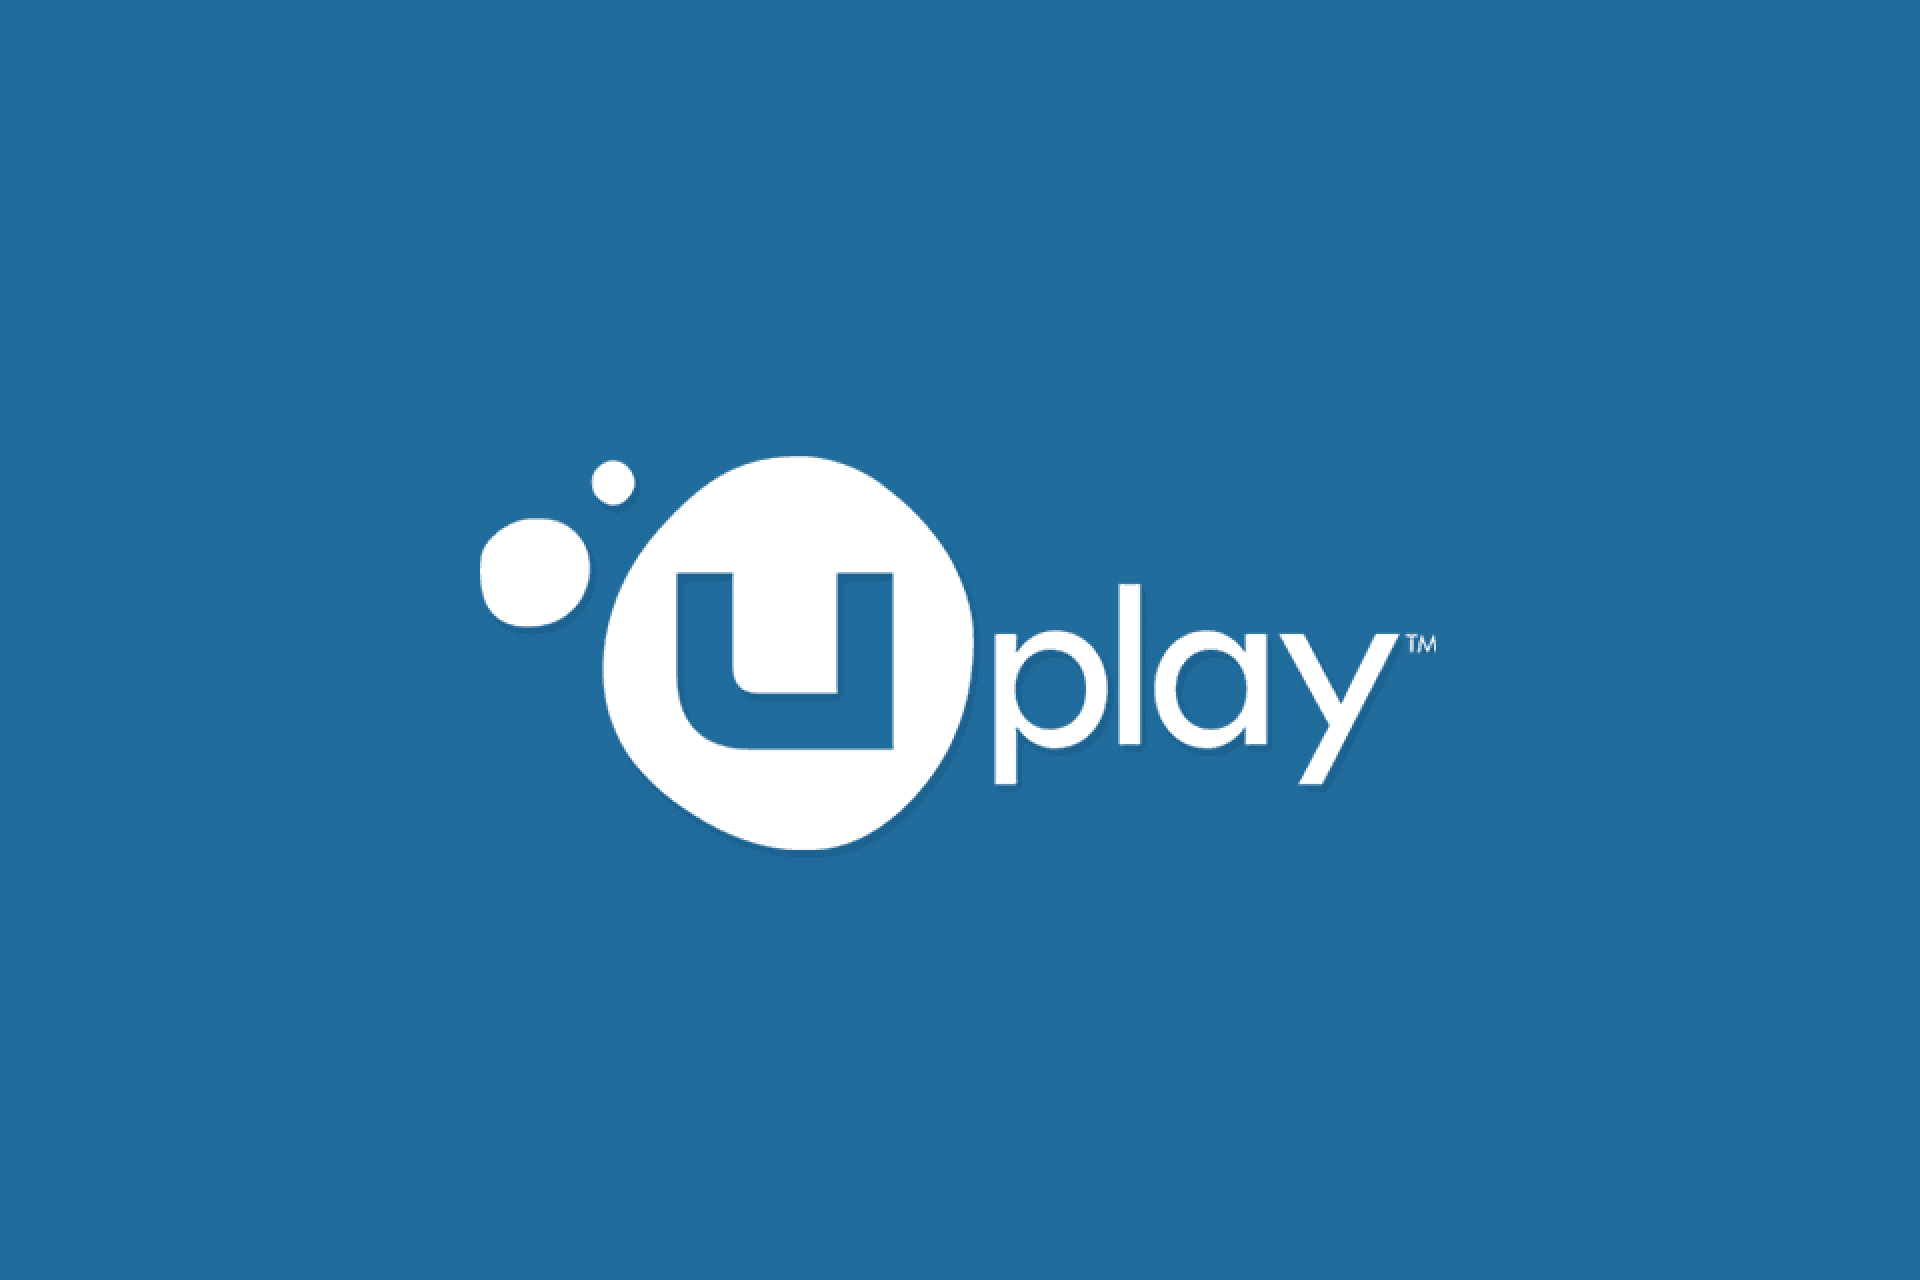 uplay connection issues PC